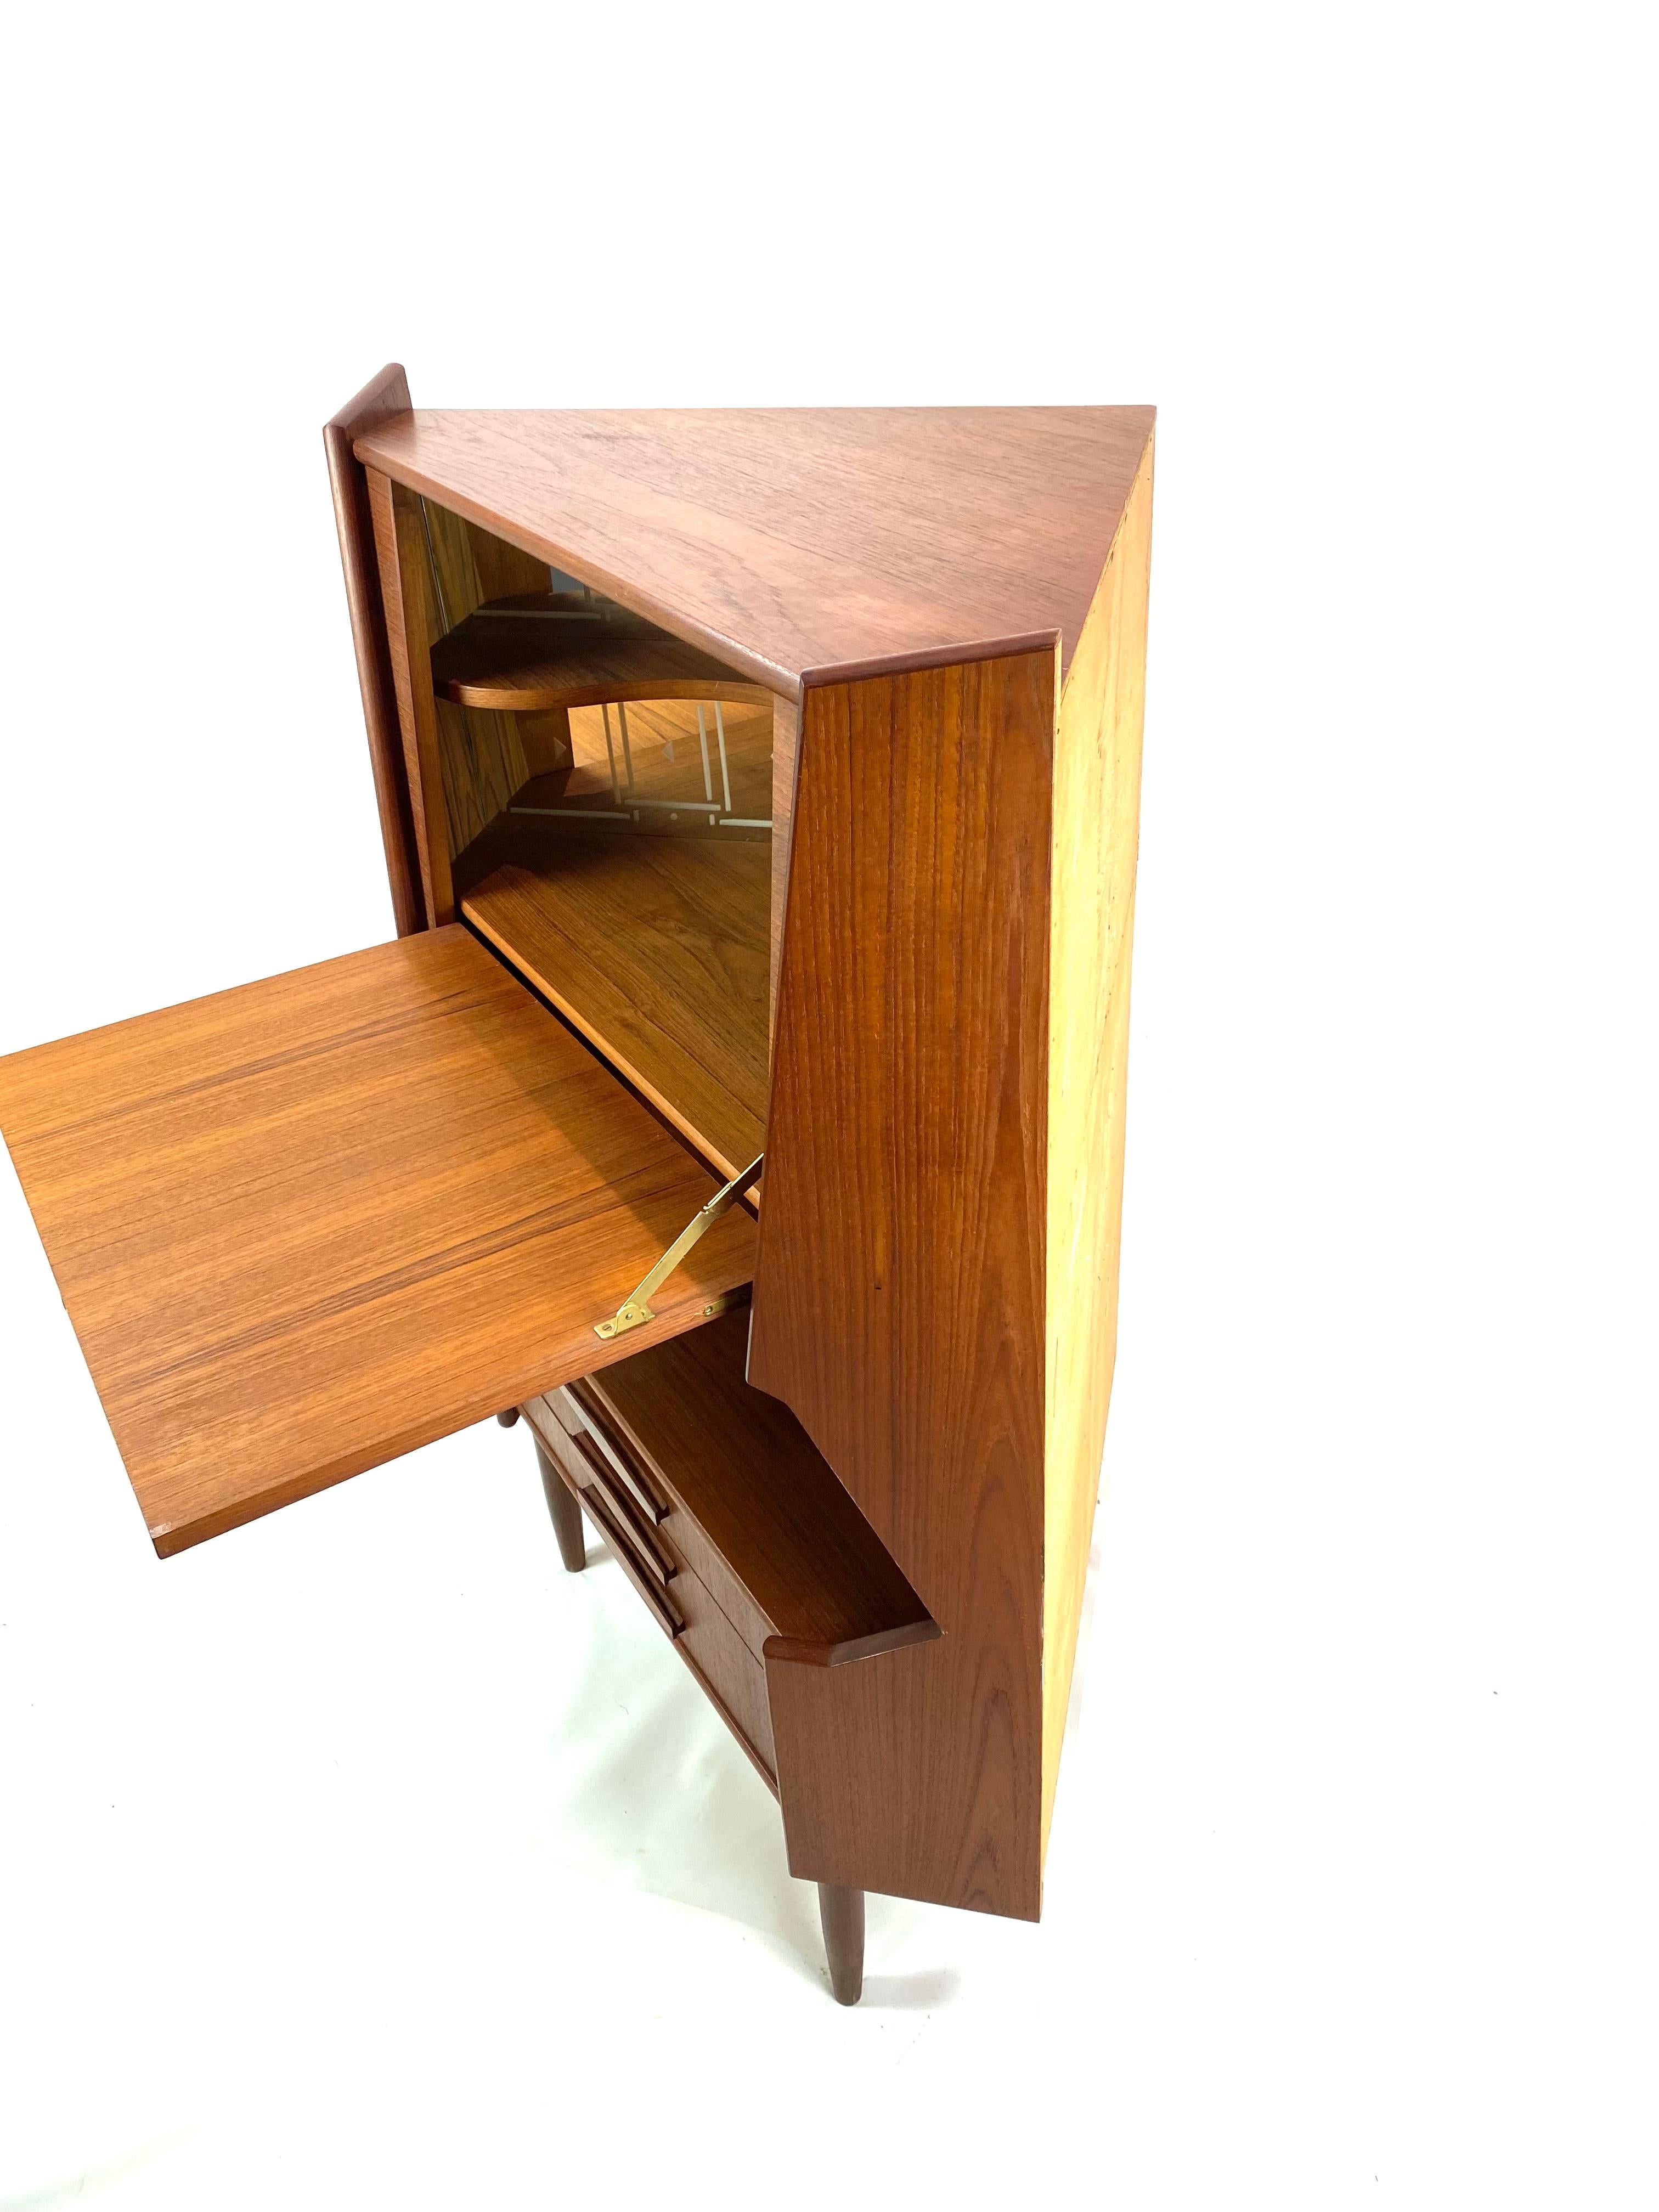 Corner Bar Cabinet Made In Teak, Danish Design From 1960's In Excellent Condition For Sale In Lejre, DK